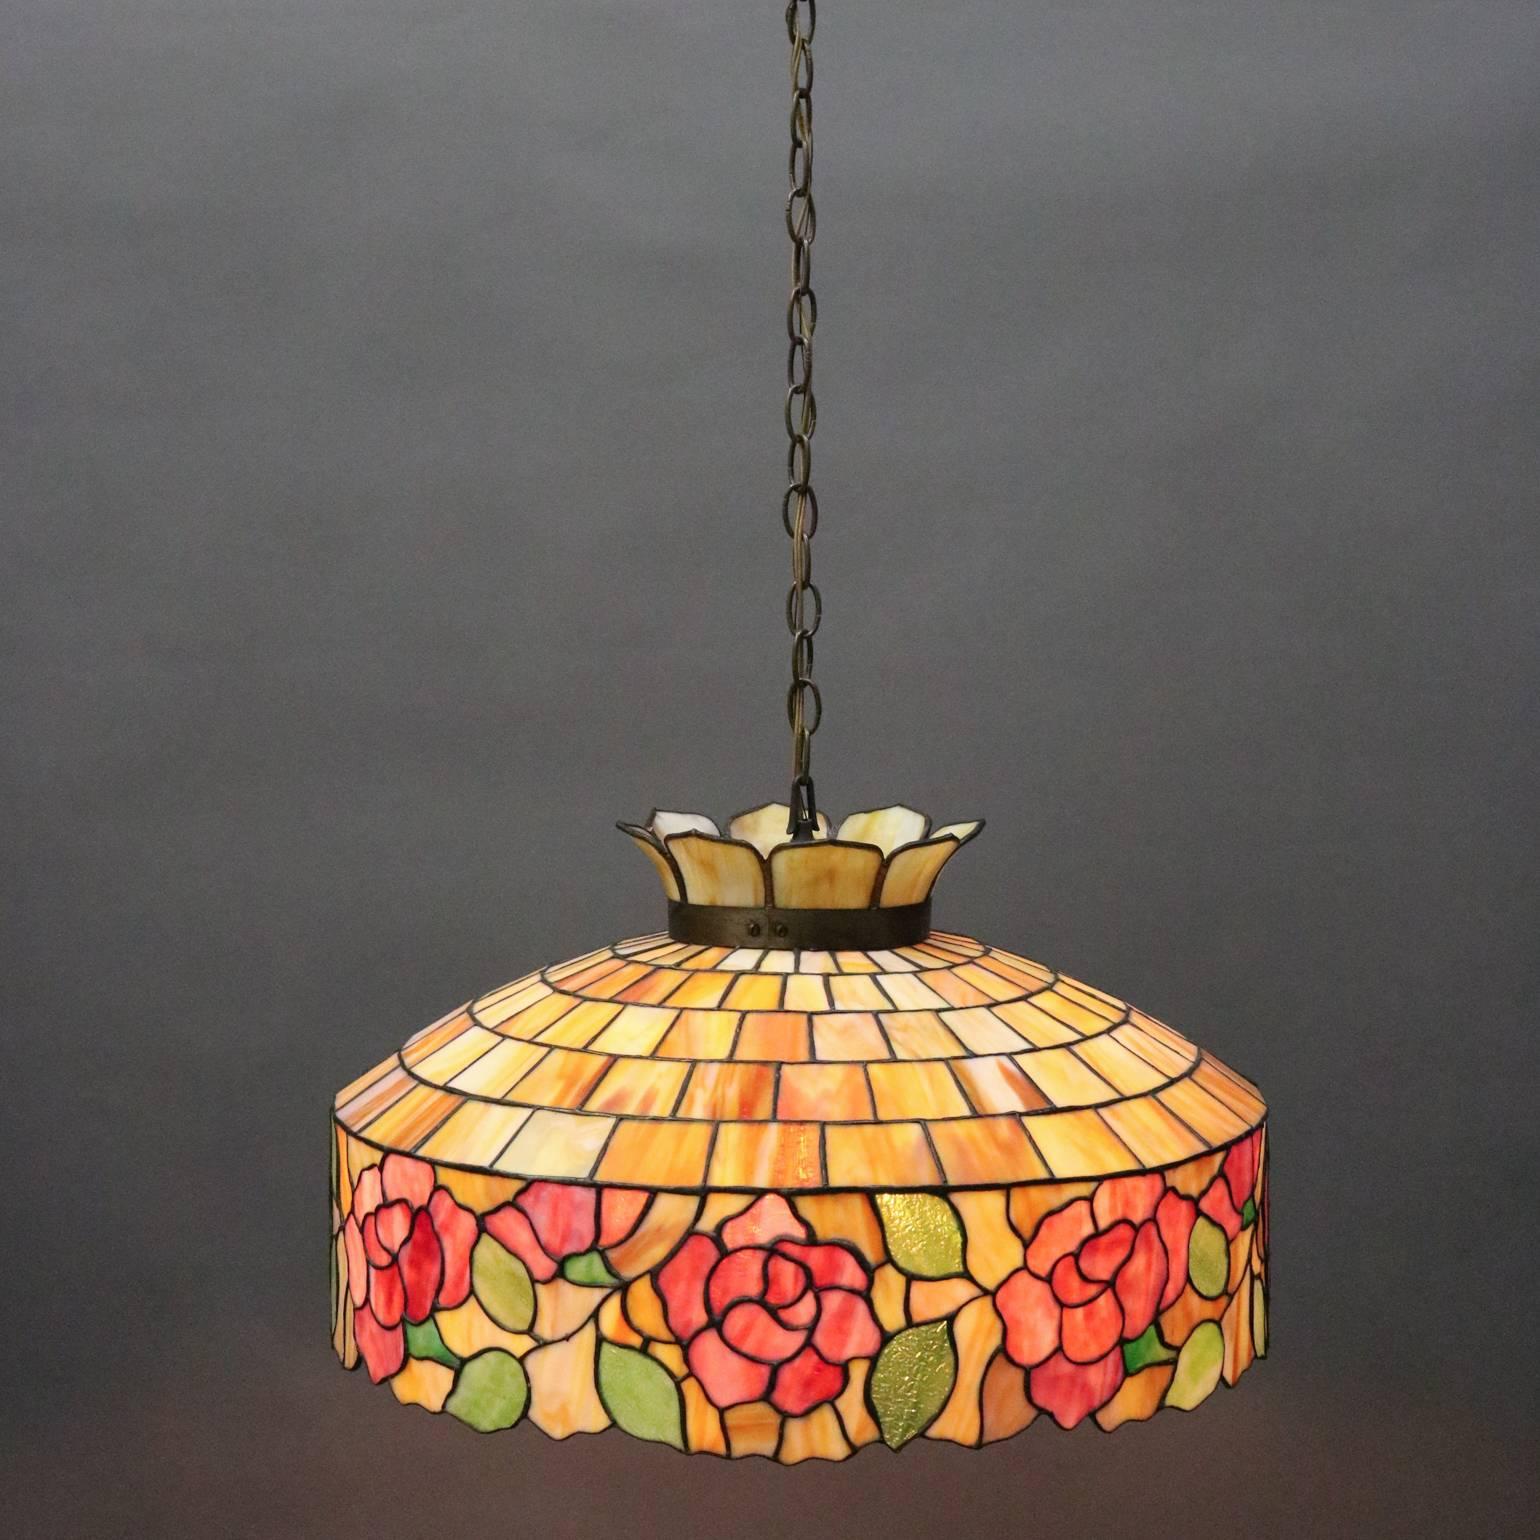 Antique Arts & Crafts Wilkinson school hanging light features leaded stained slag glass construction with floral rose decoration, circa 1920

Measures - 39" drop from canopy x 24" diameter x 16" H.